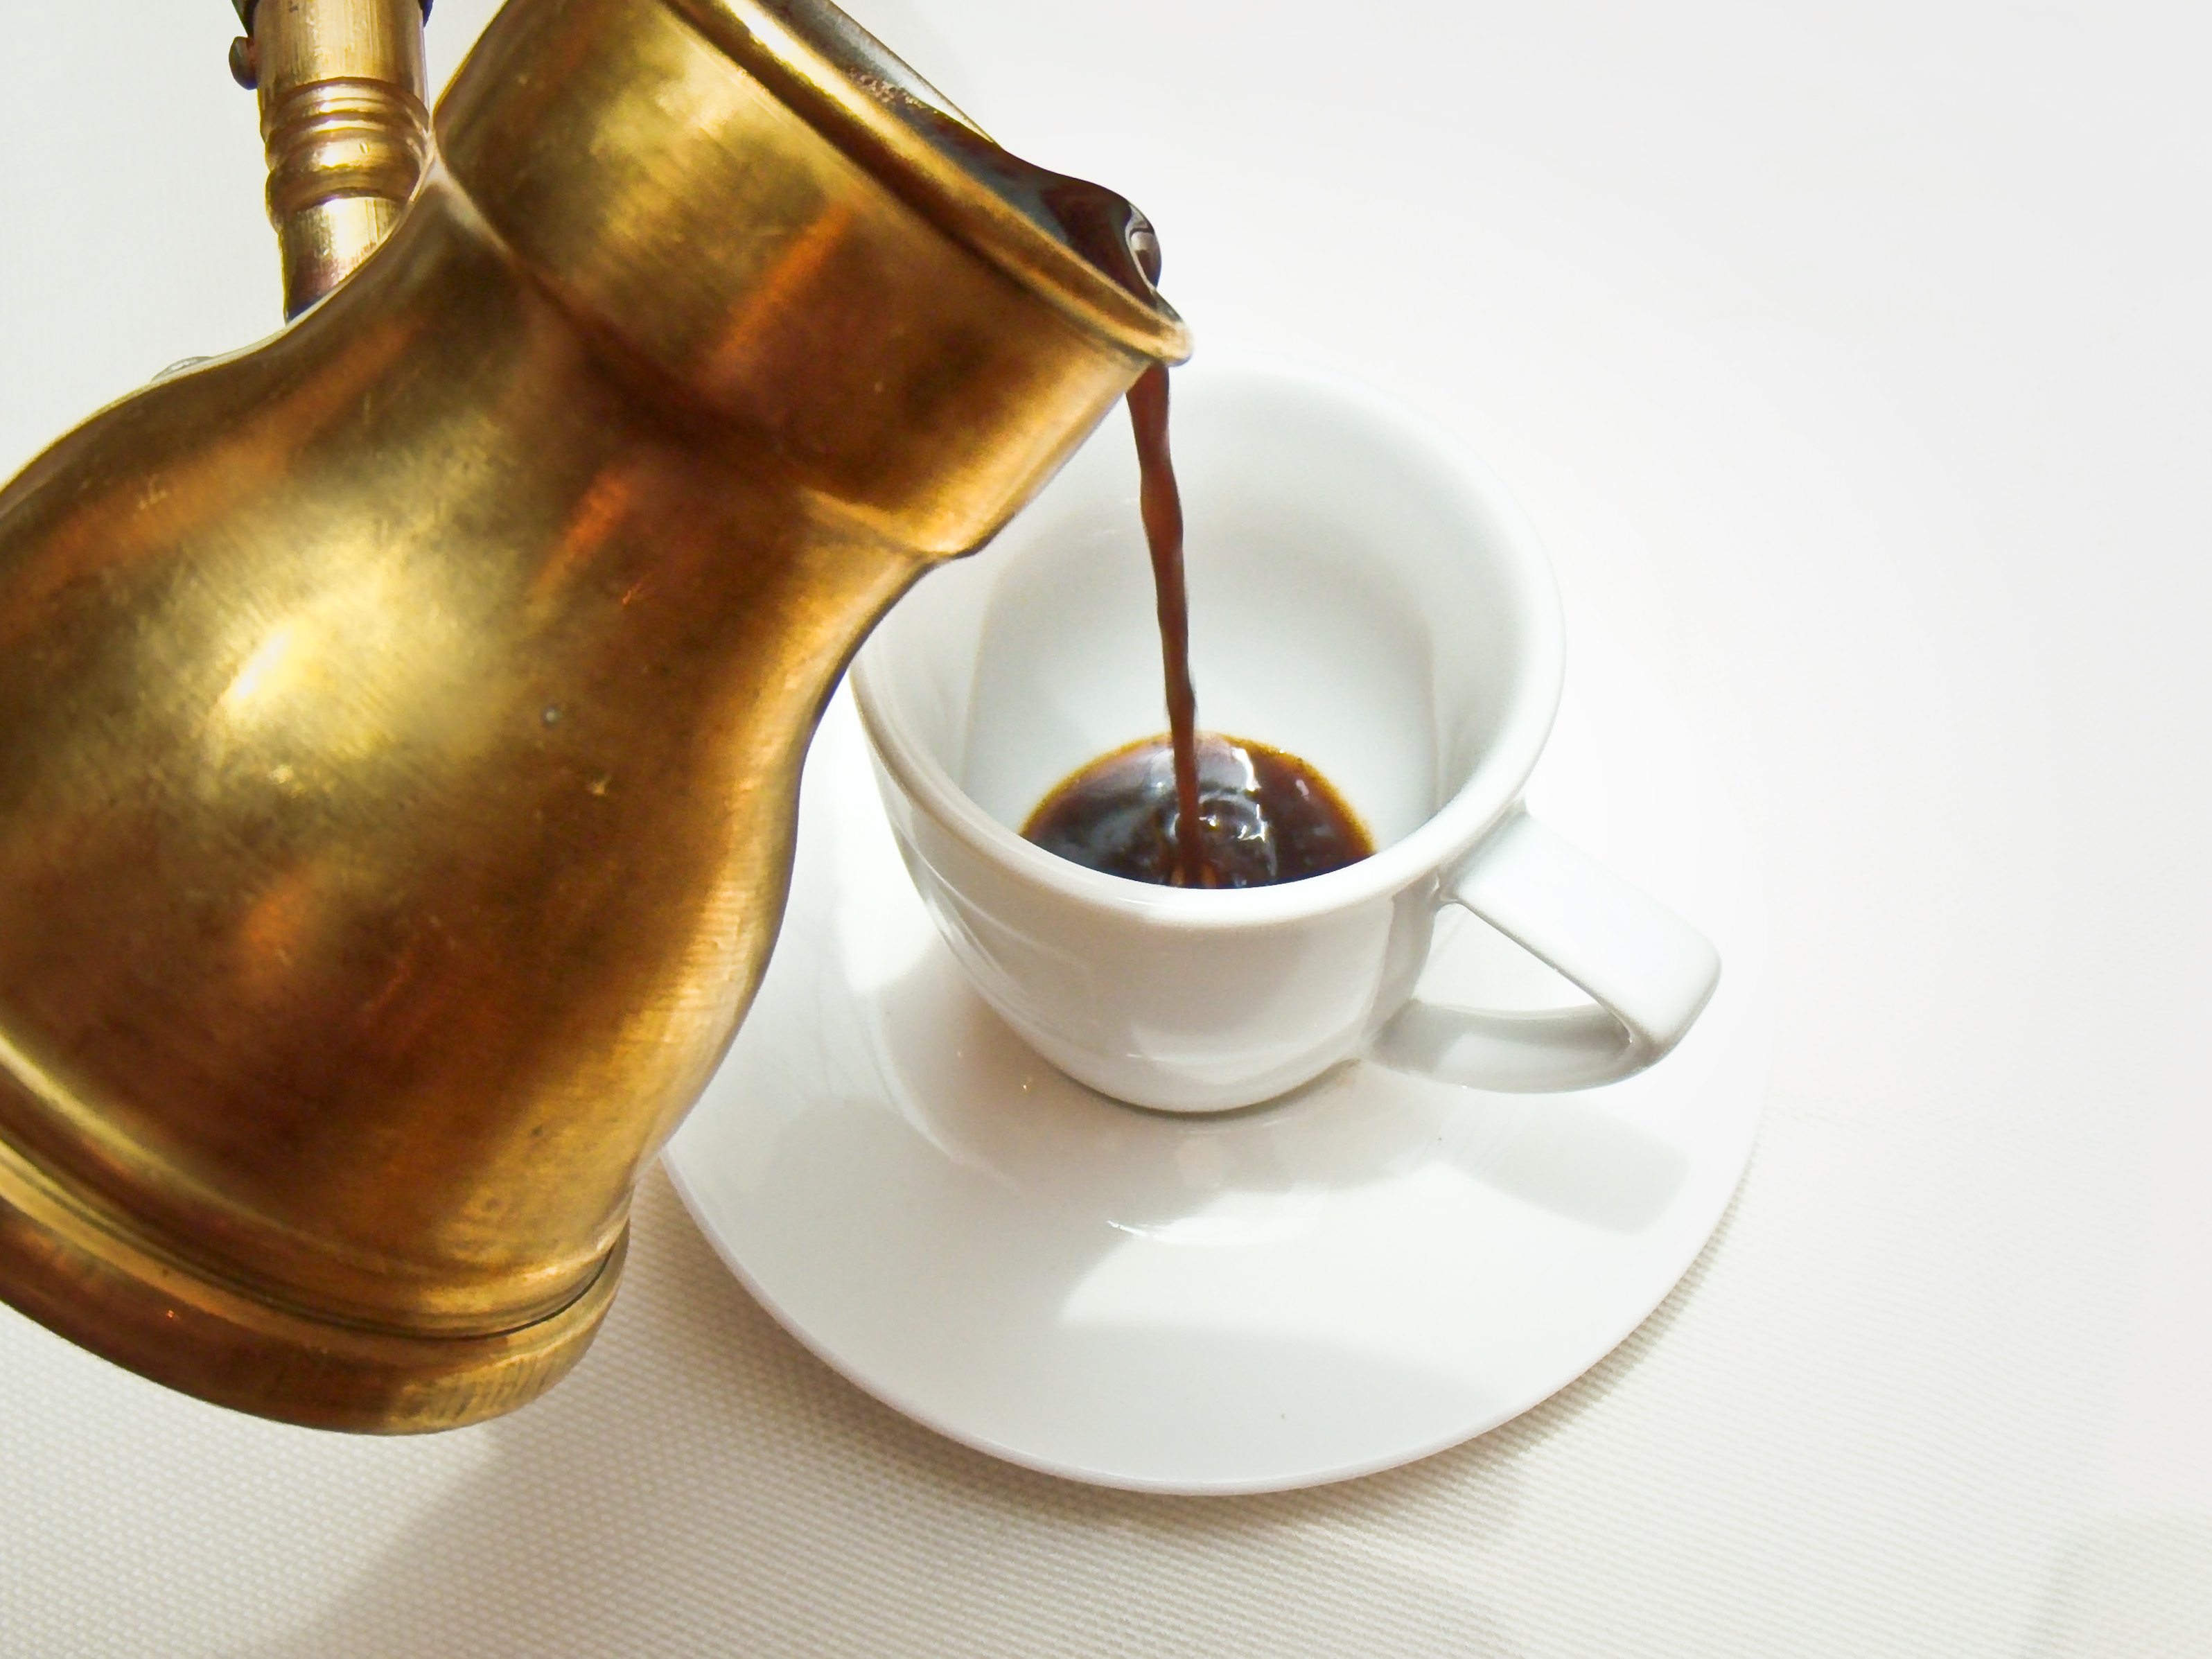 Picture of Turkish Coffee